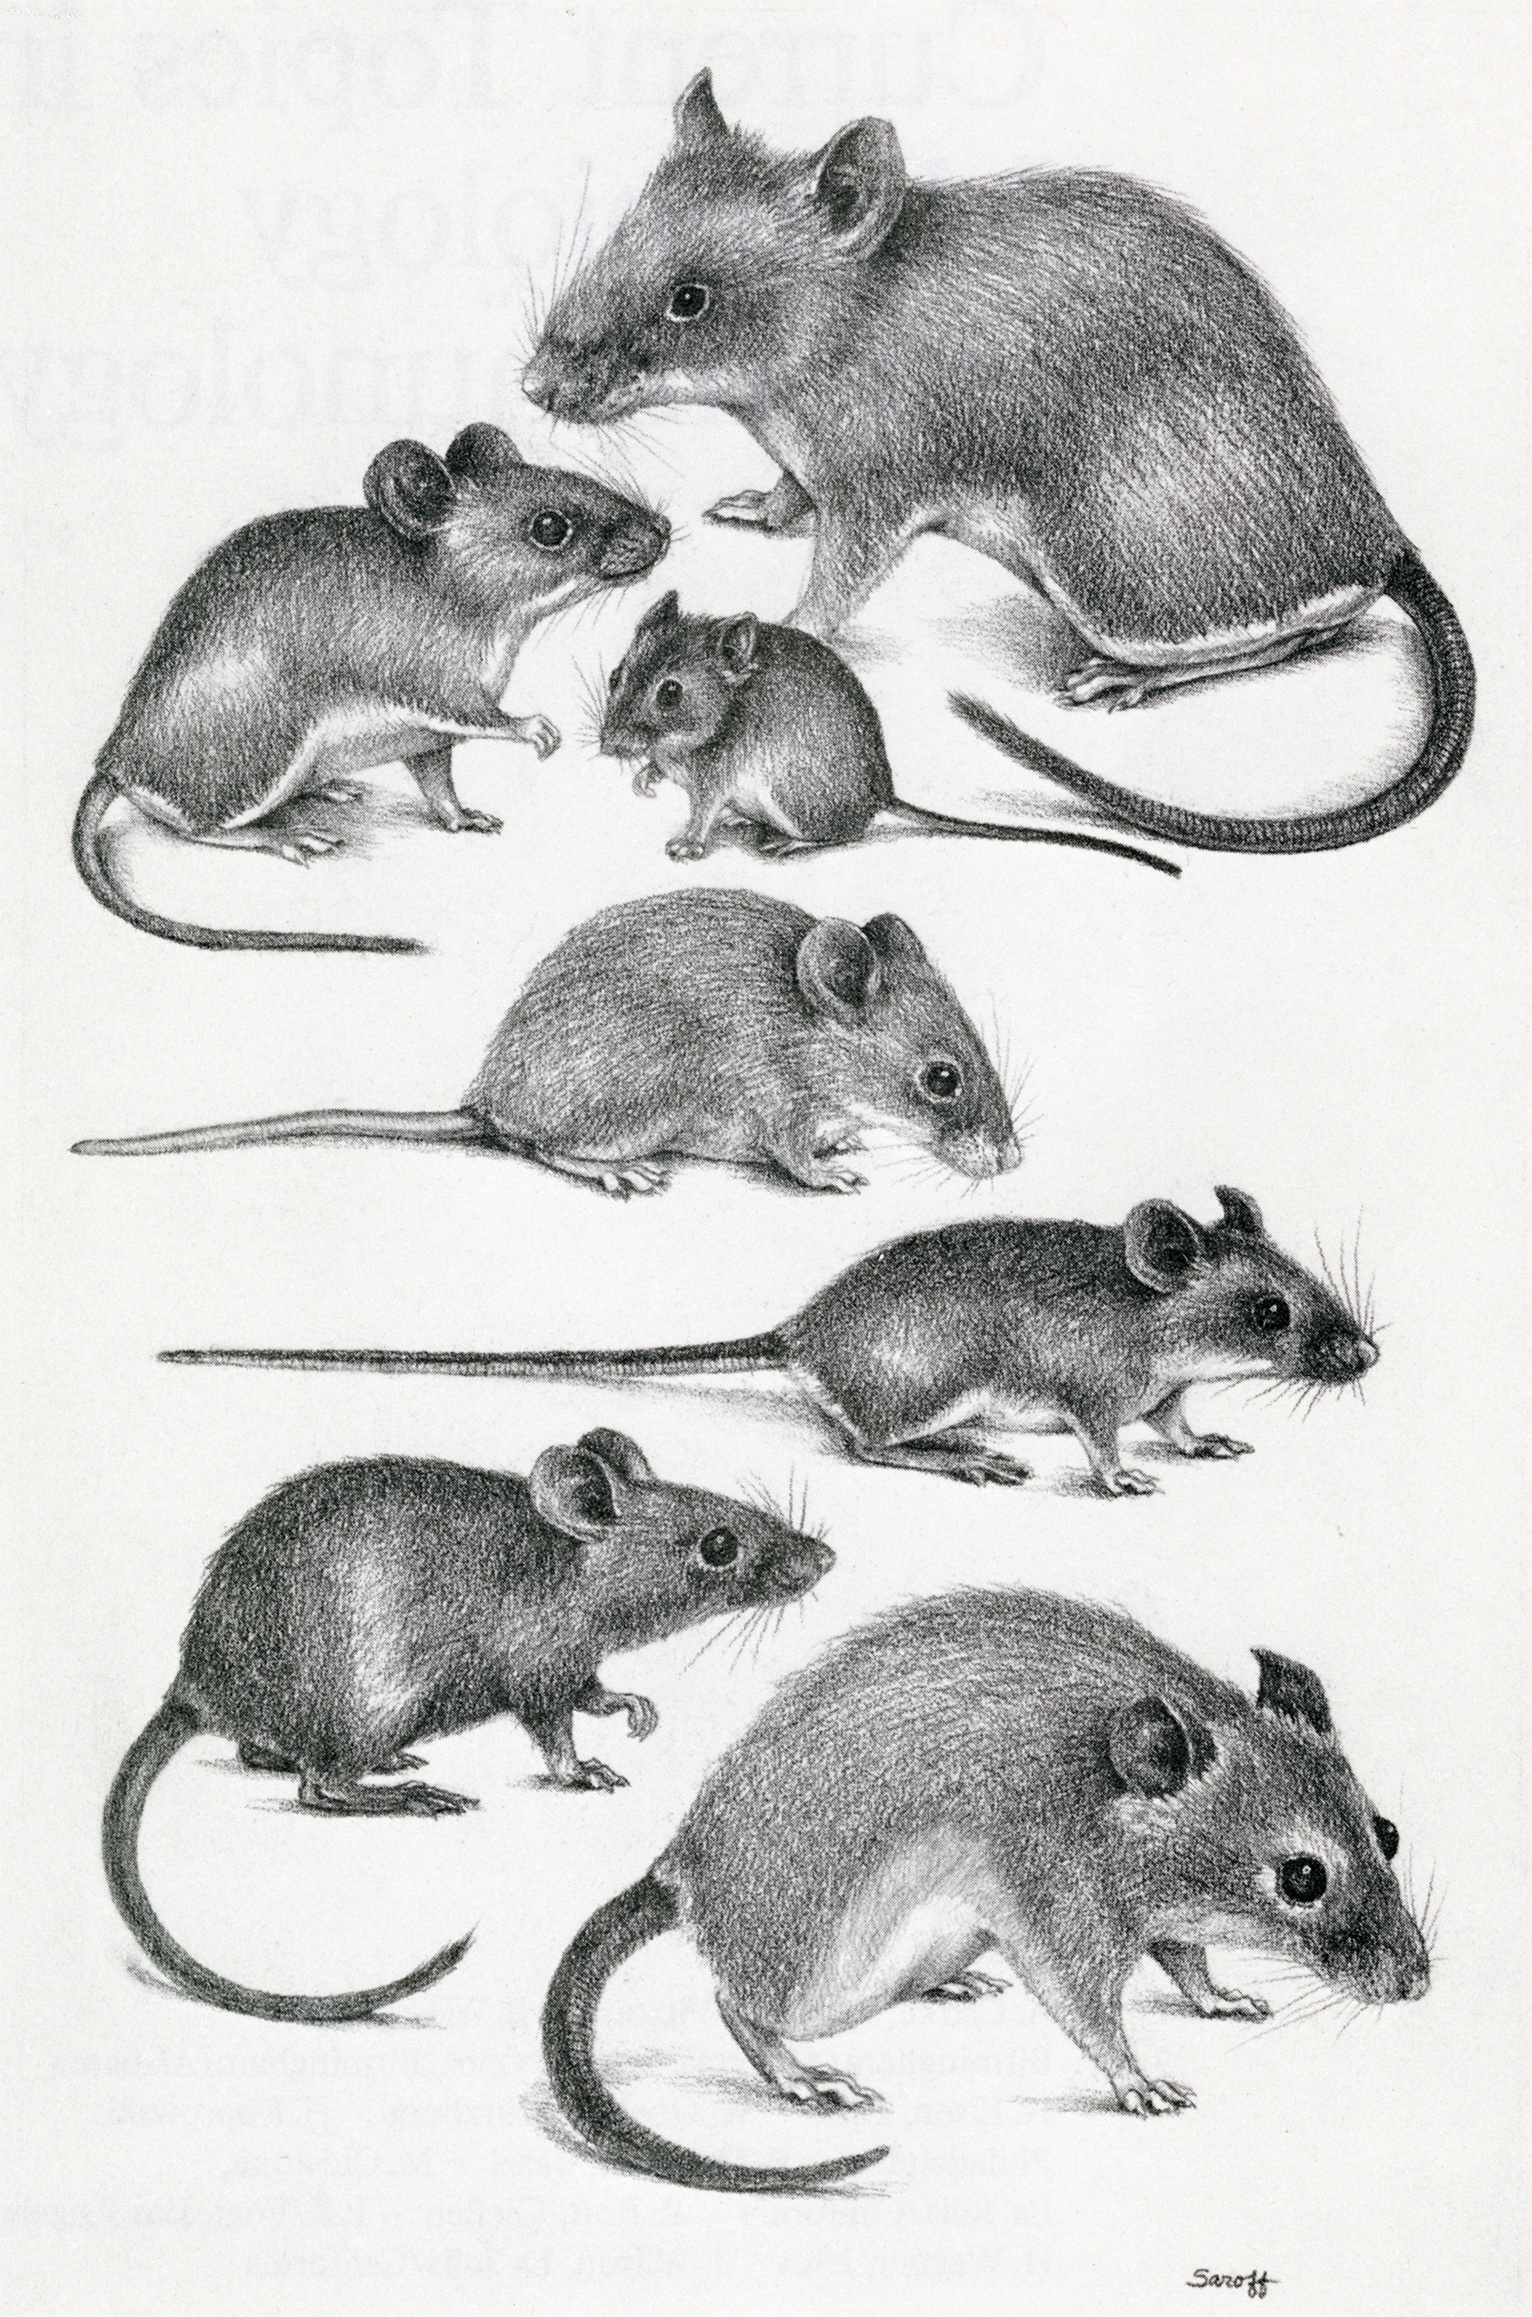 Illustration of a variety of mice